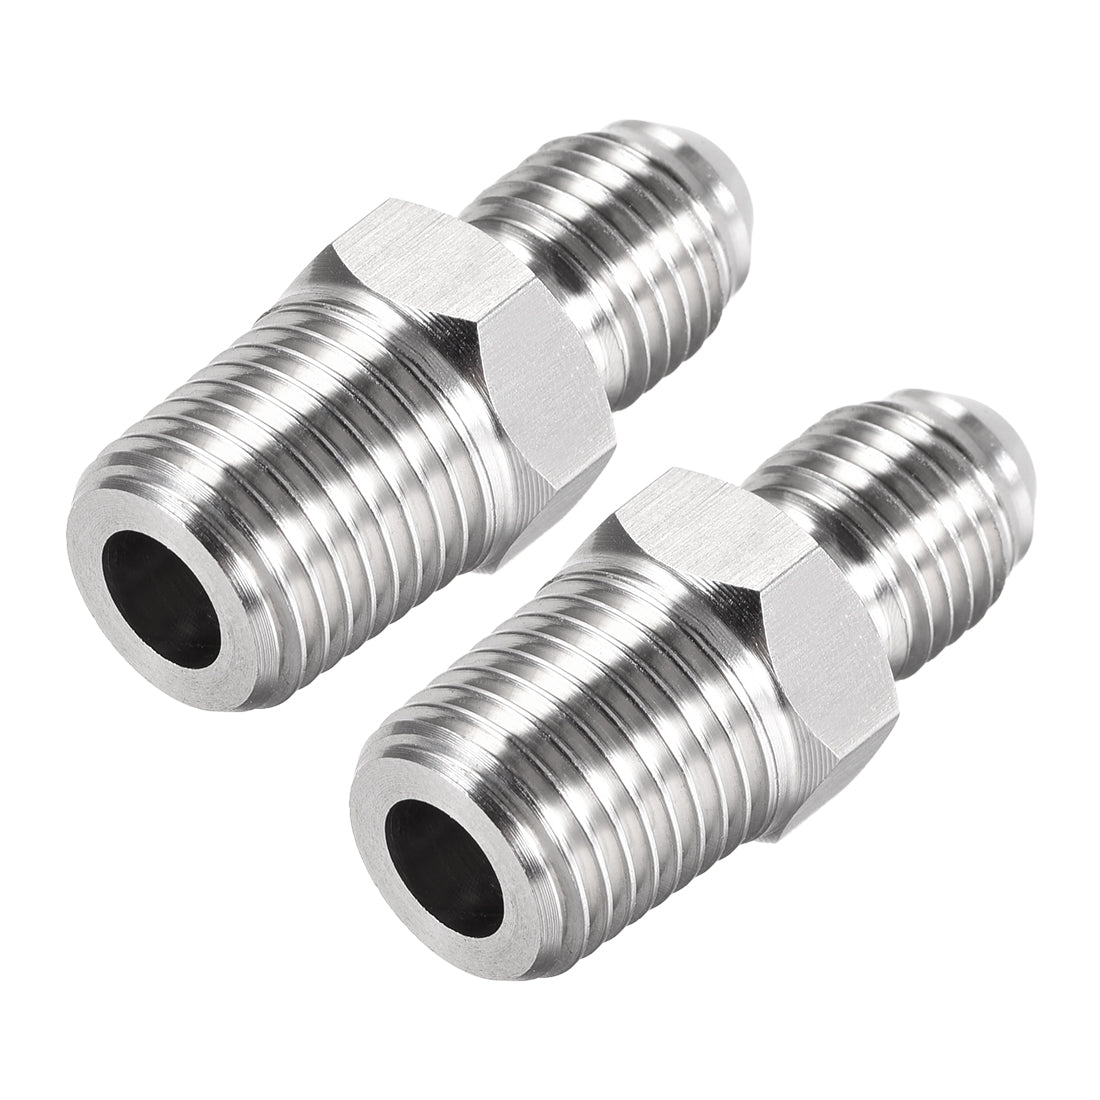 Uxcell Uxcell Hex Nipple 1/2 NPT x 3/4-16UNF 304 Stainless Steel Pipe Tube Fitting 2Pcs